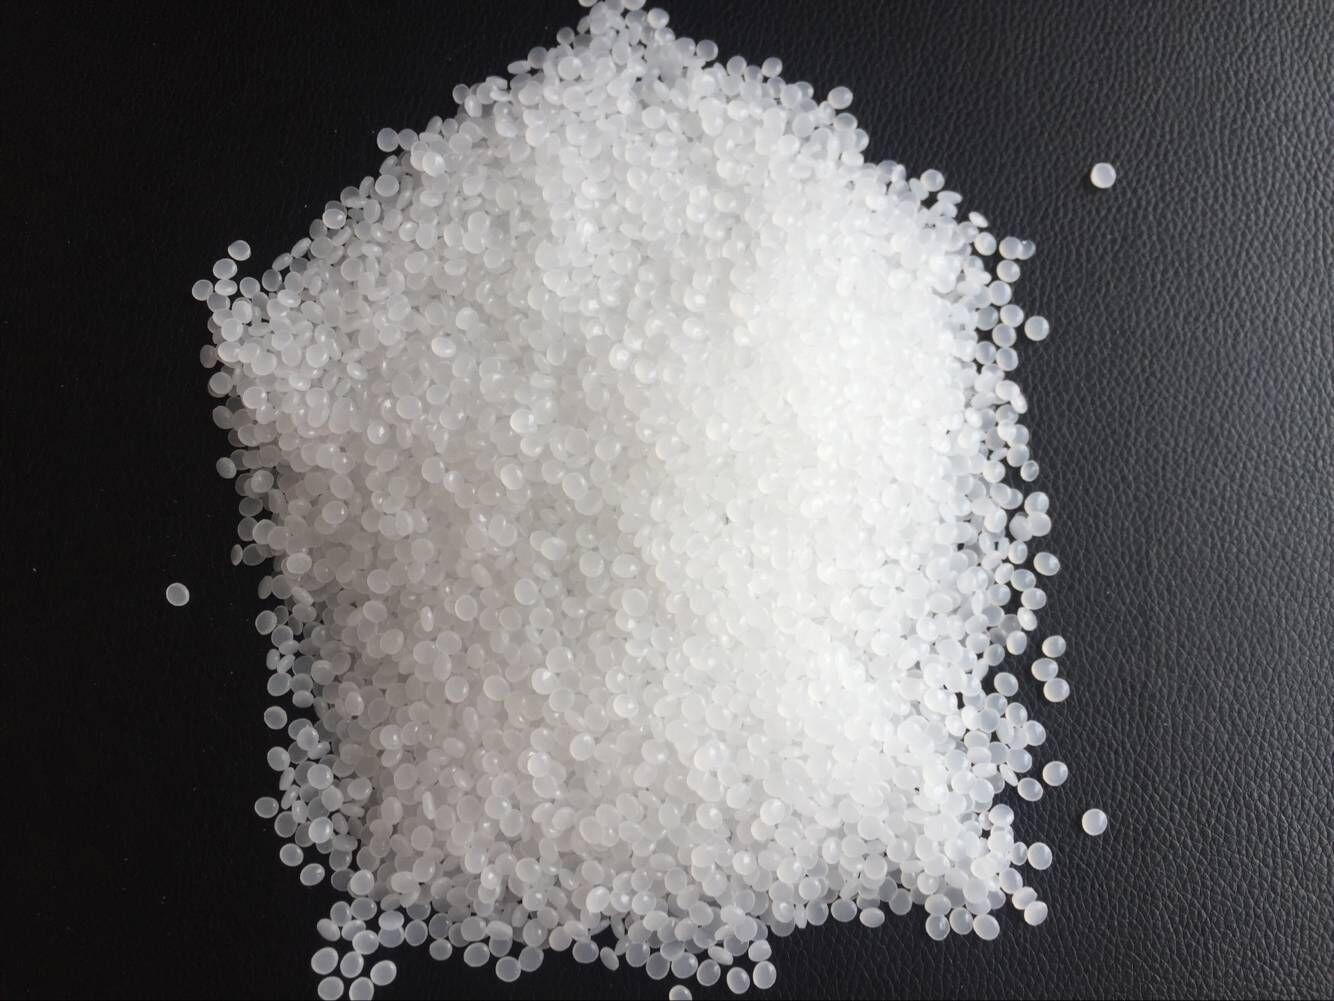 Virgin/Recycled LDPE Granules for Blowing/Plastic raw material/LDPE 2409X